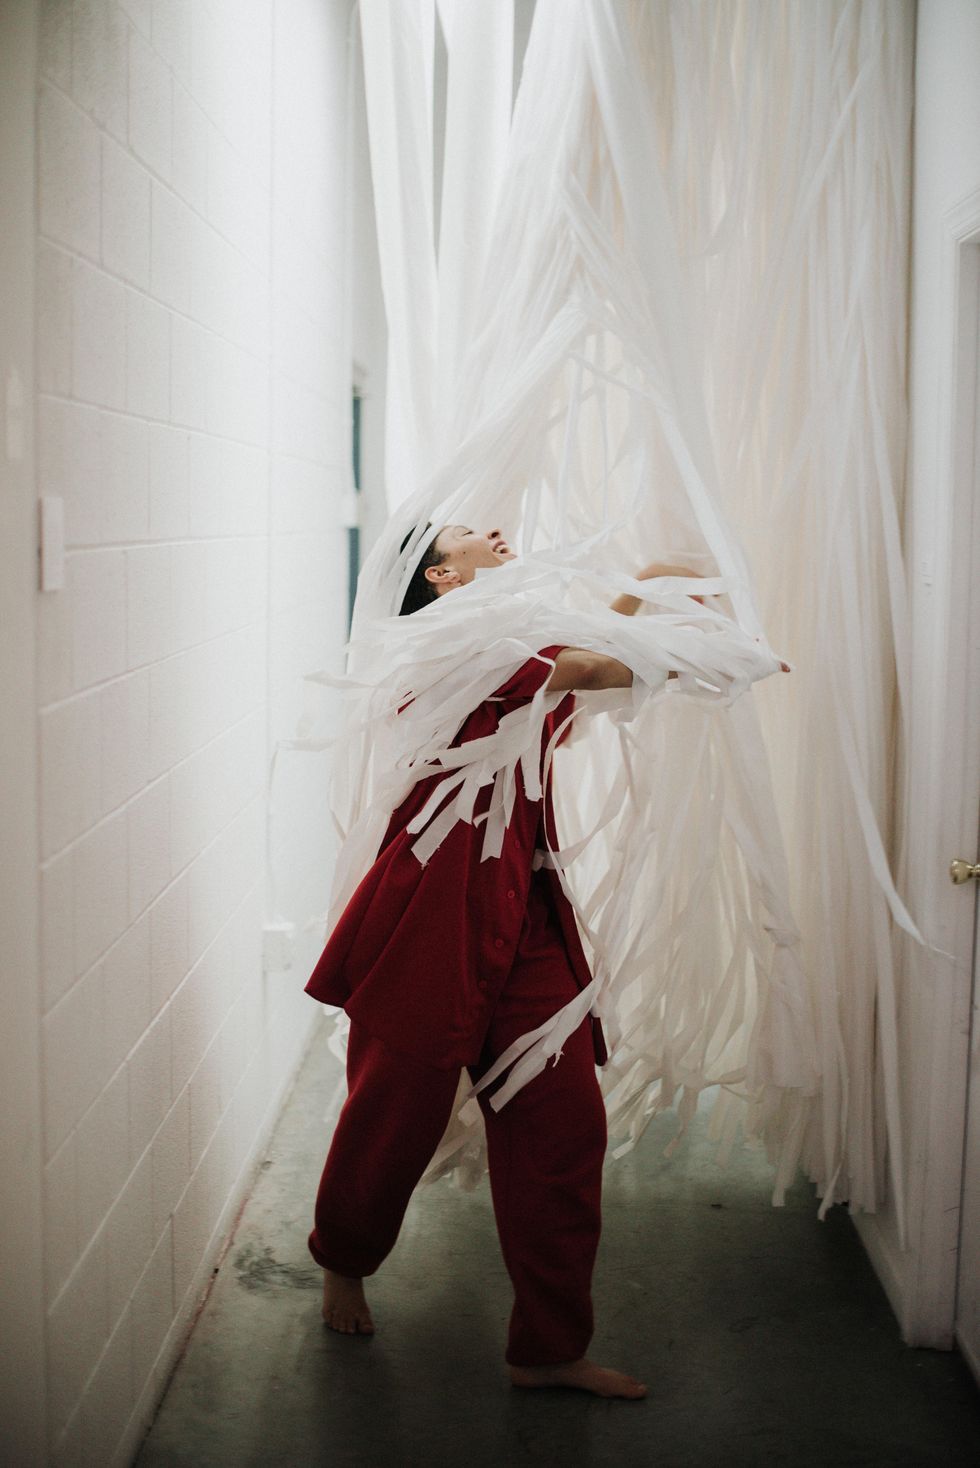 Myssi Robinson joyfully dances through a curtain of white streamers, her head thrown back as she smiles widely. Her arms slice through the streamers.